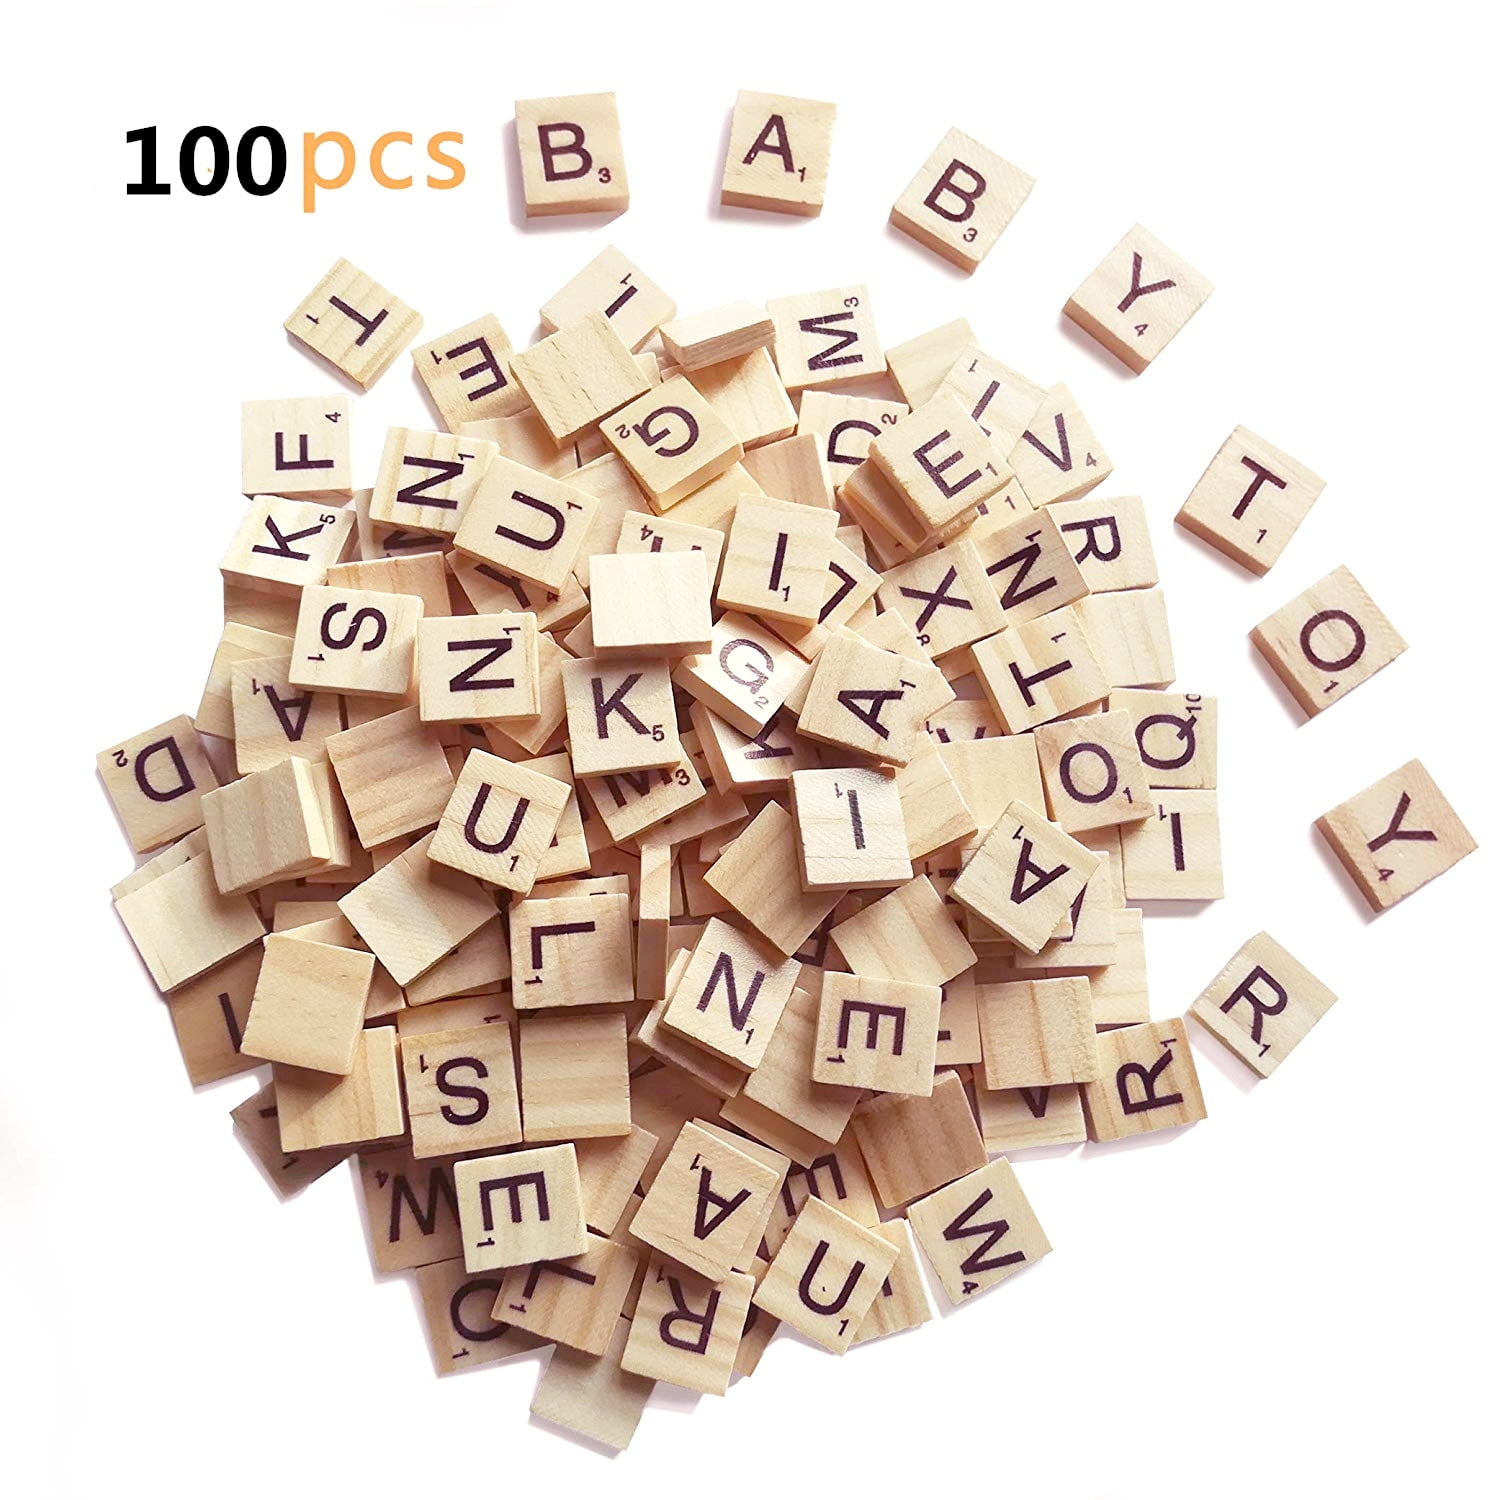 100 WOODEN SCRABBLE TILES BLACK LETTERS NUMBERS FOR CRAFTS WOOD ALPHABETS 